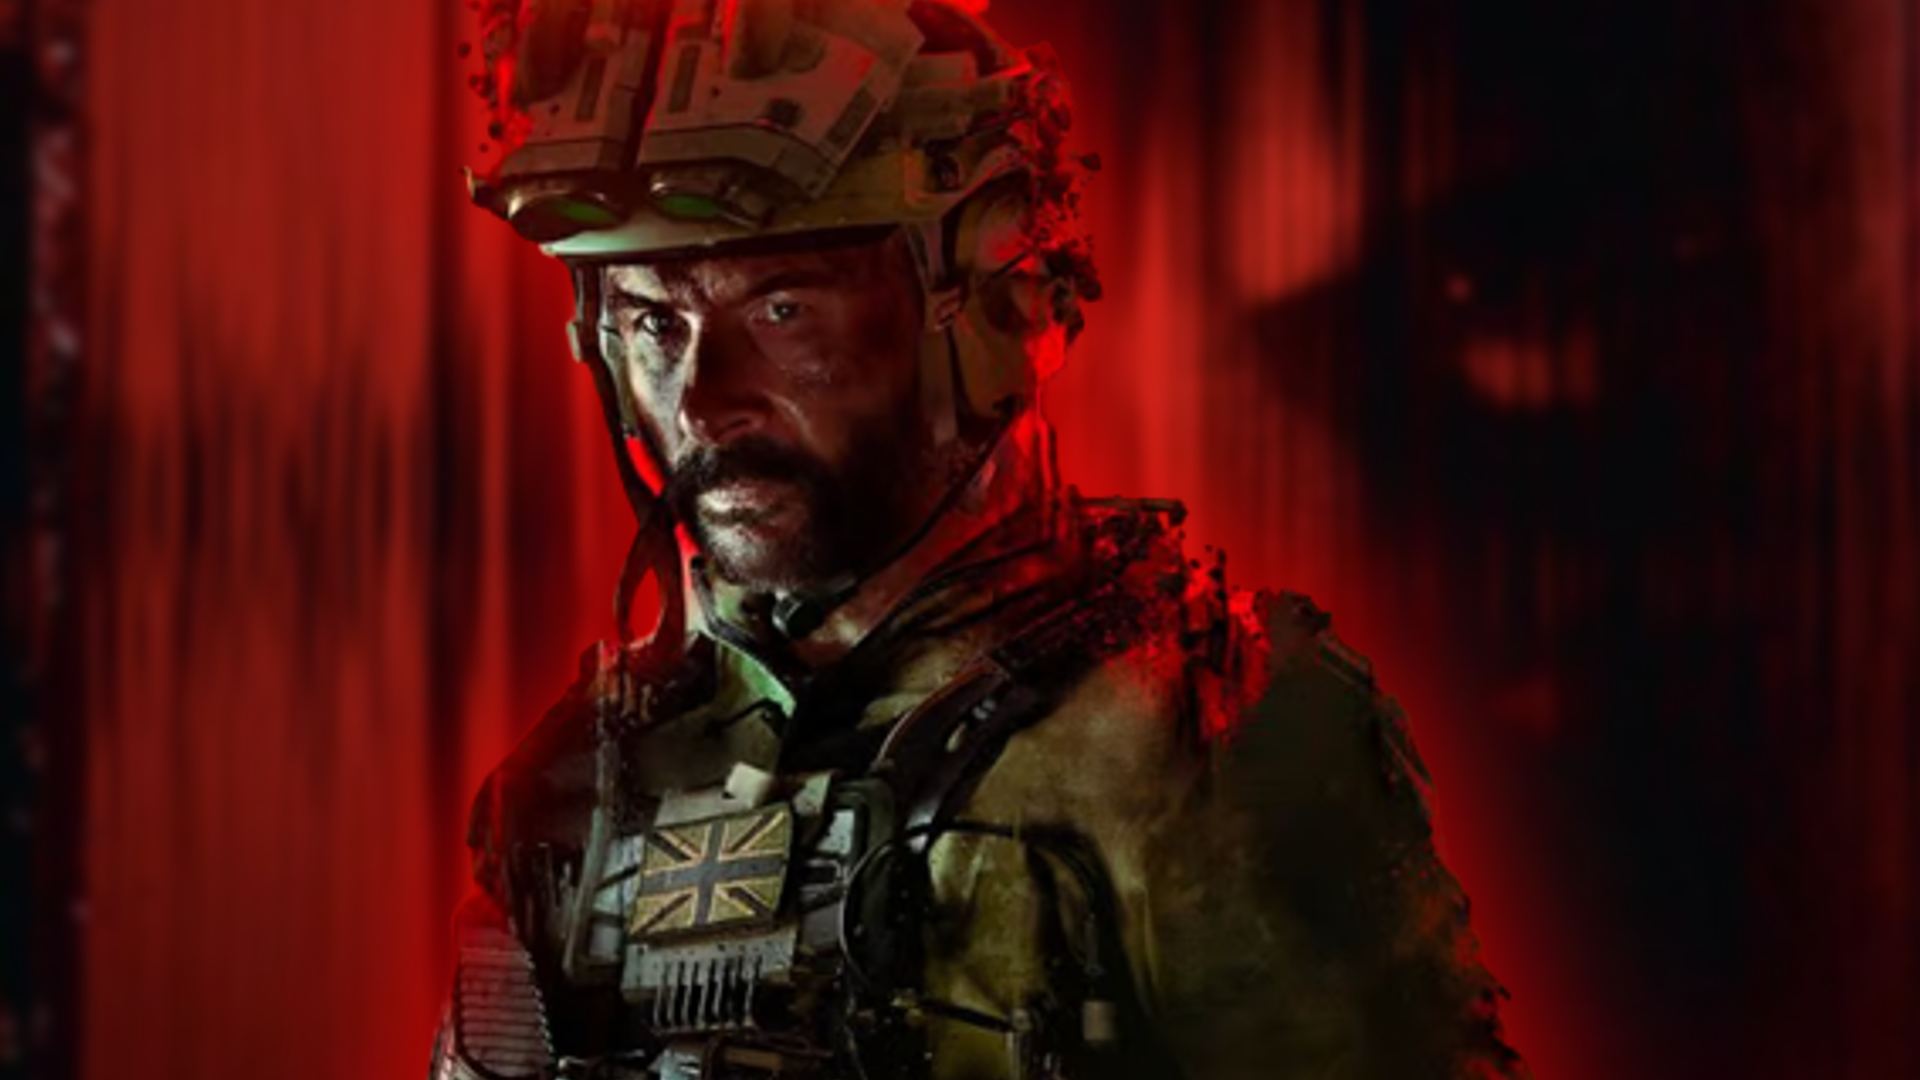 Call of Duty: 'Call of Duty: Modern Warfare 3': Know all voice actors,  characters in game - The Economic Times